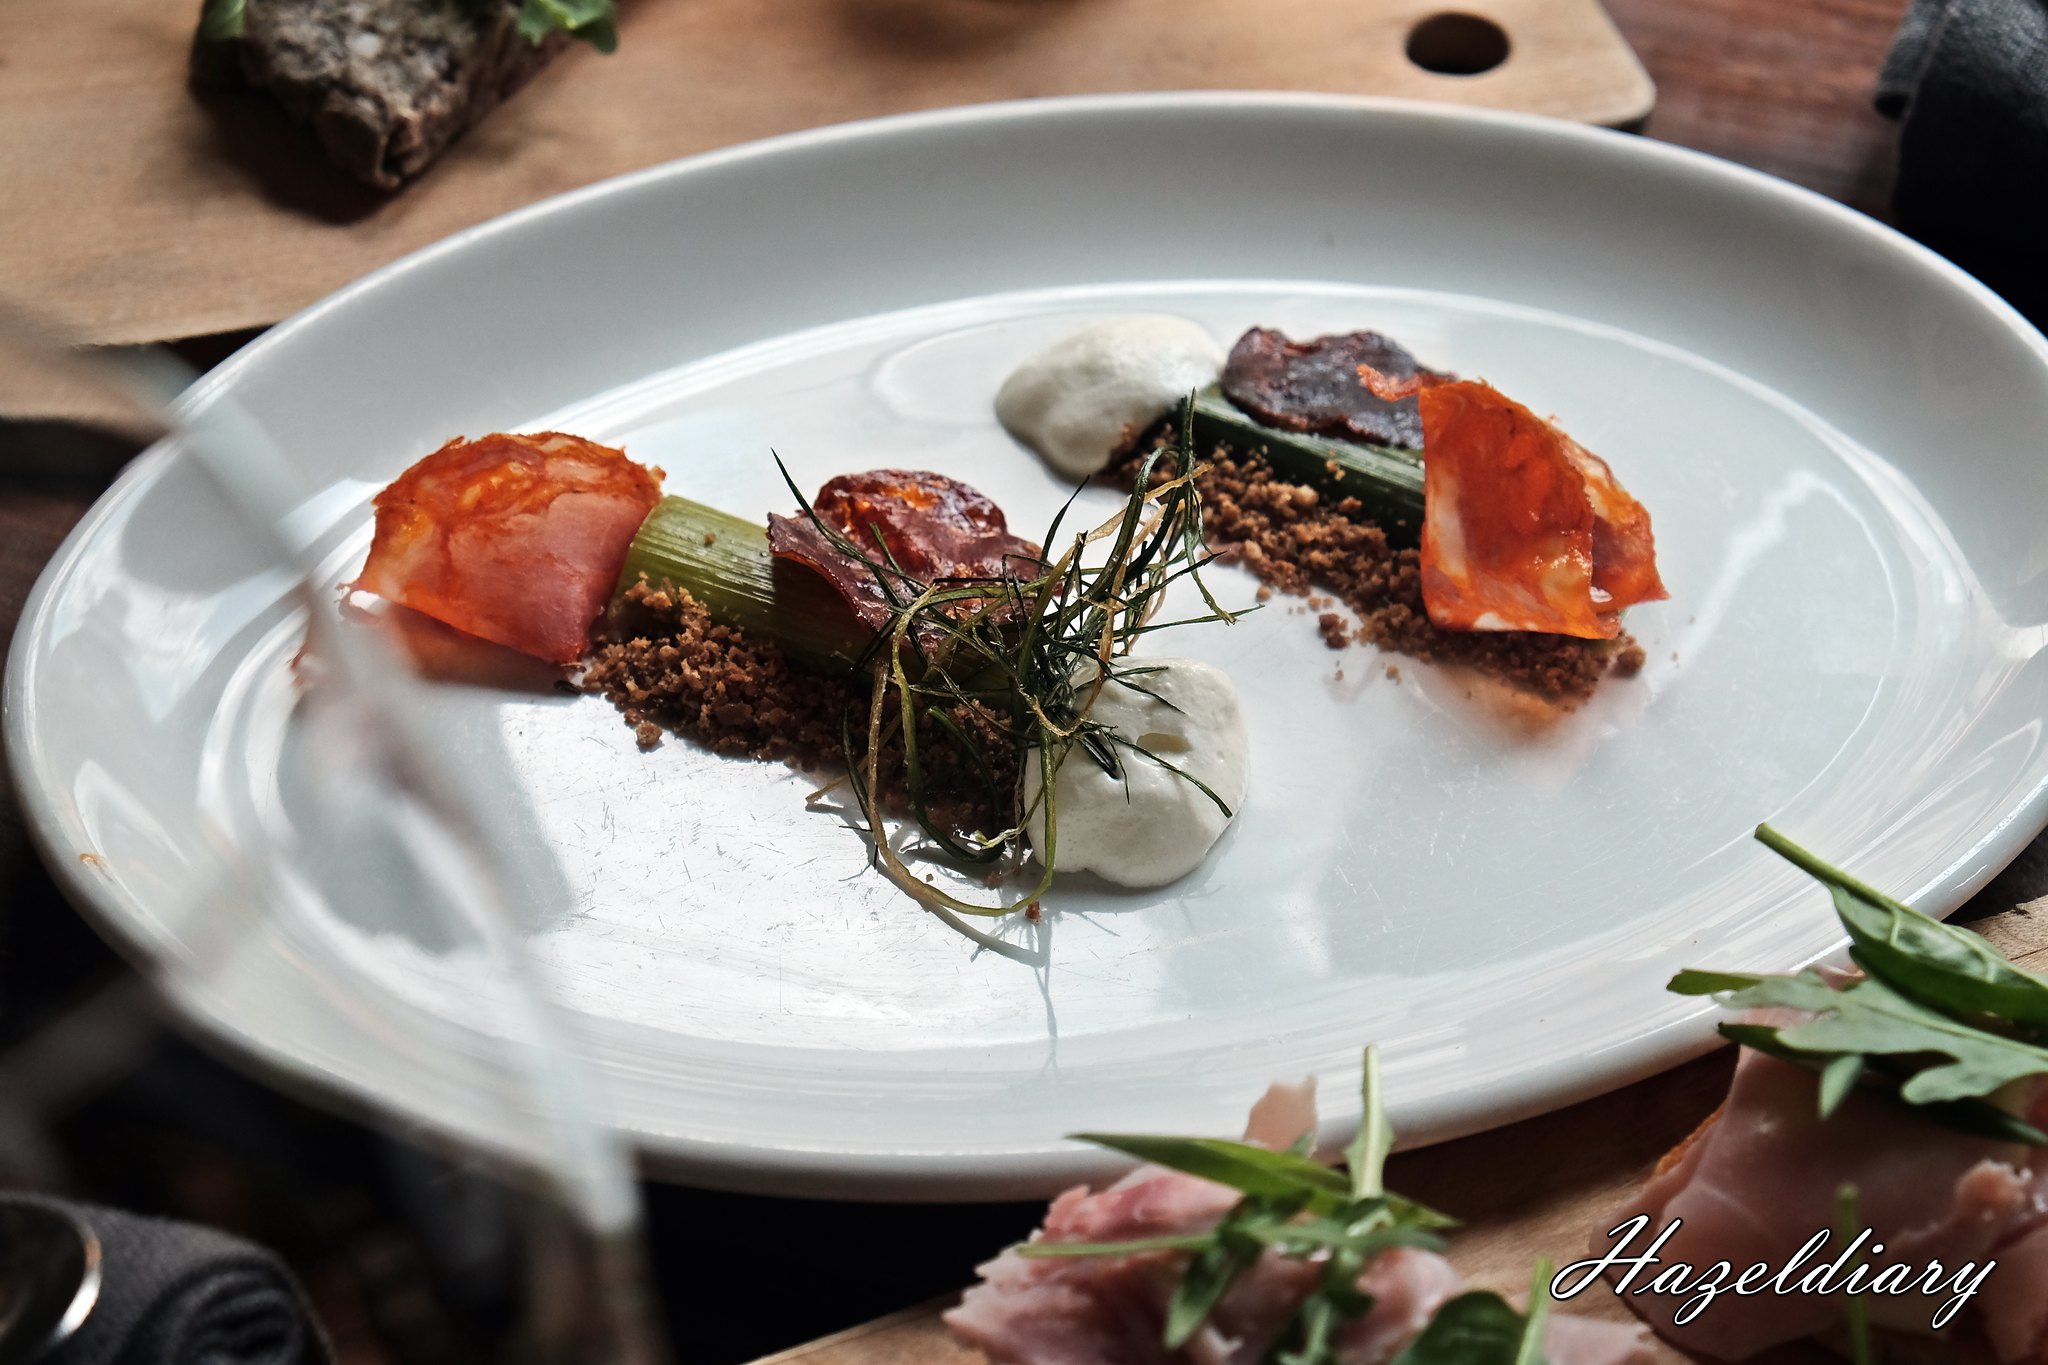 Audace Restaurant and Bar-unlisted collection singapore